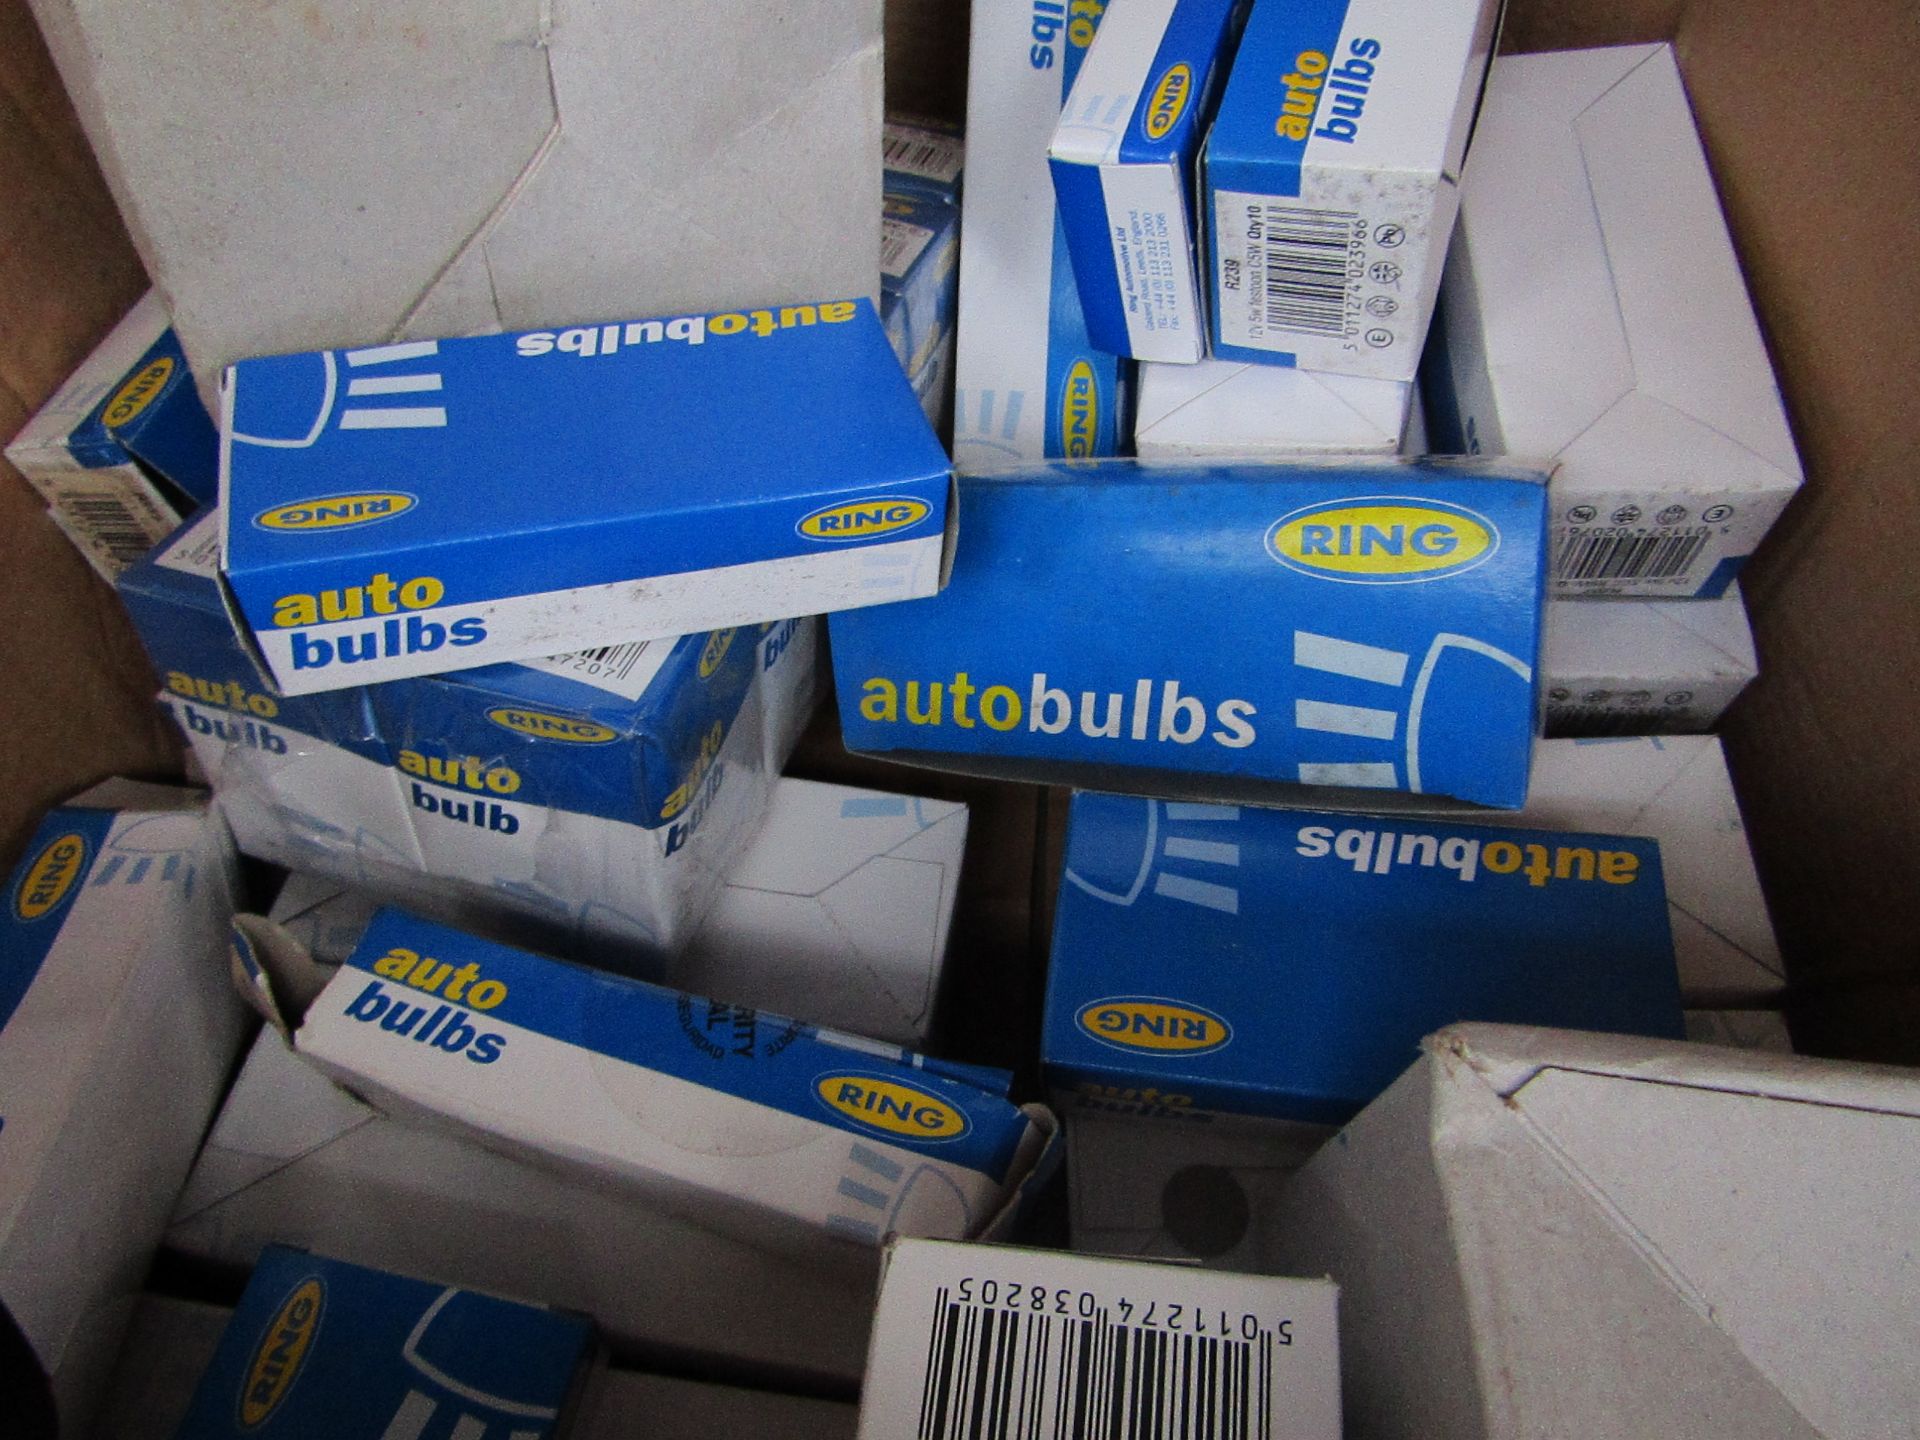 6x Boxes Of Auto Bulbs - All Picked At Random.